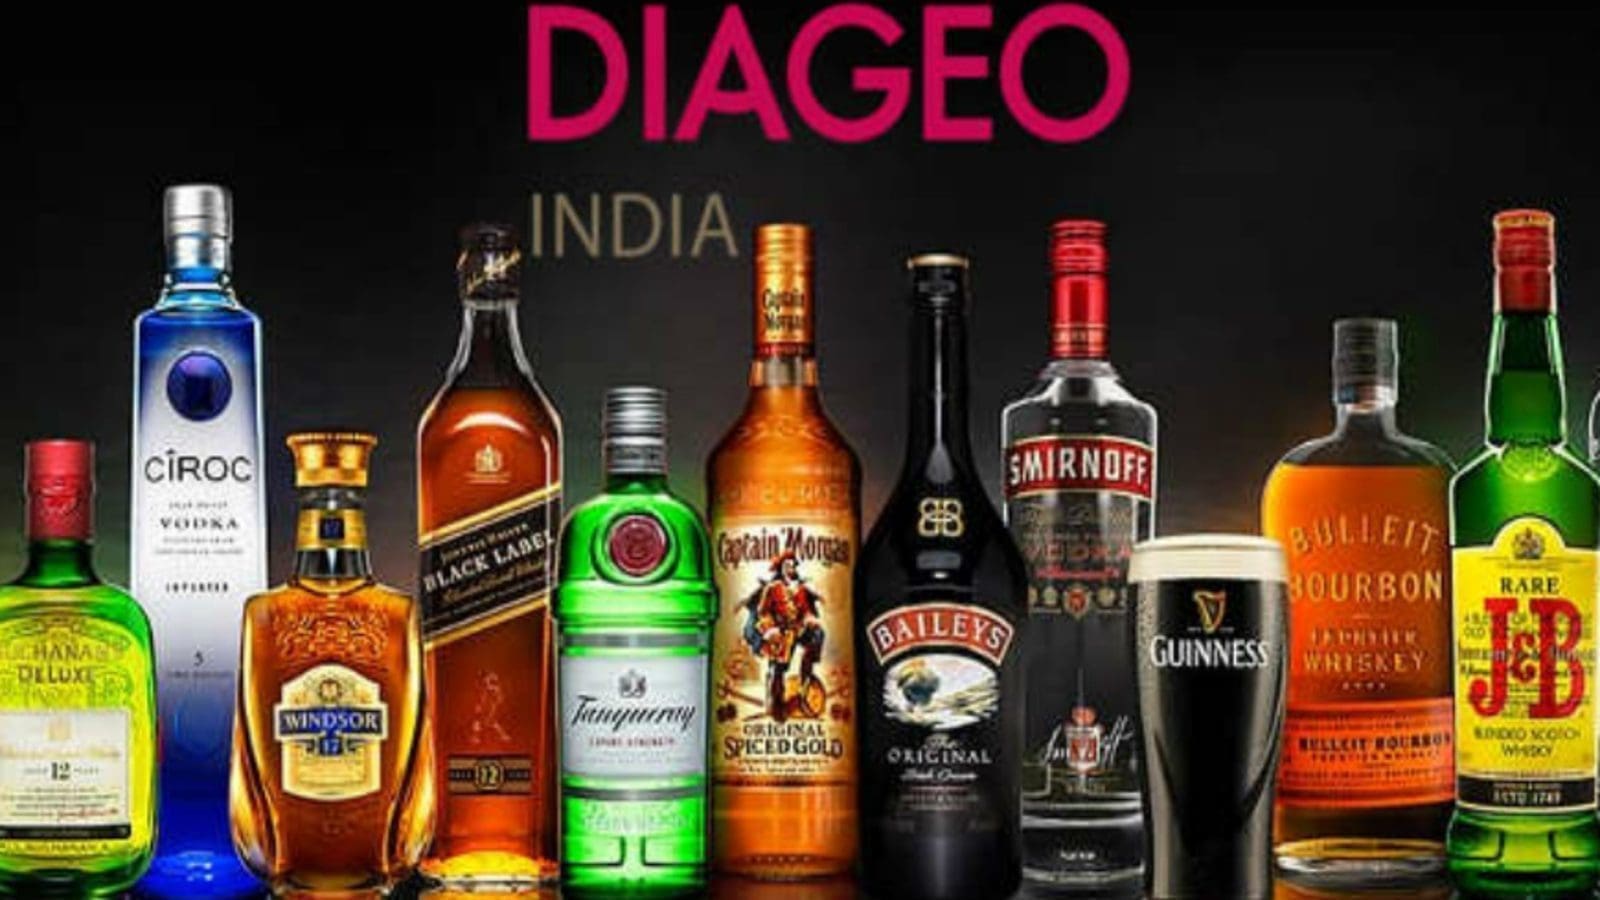 Diageo invests US$5.7m in craft and innovation hub to strengthen presence in India’s growing alcoholic market